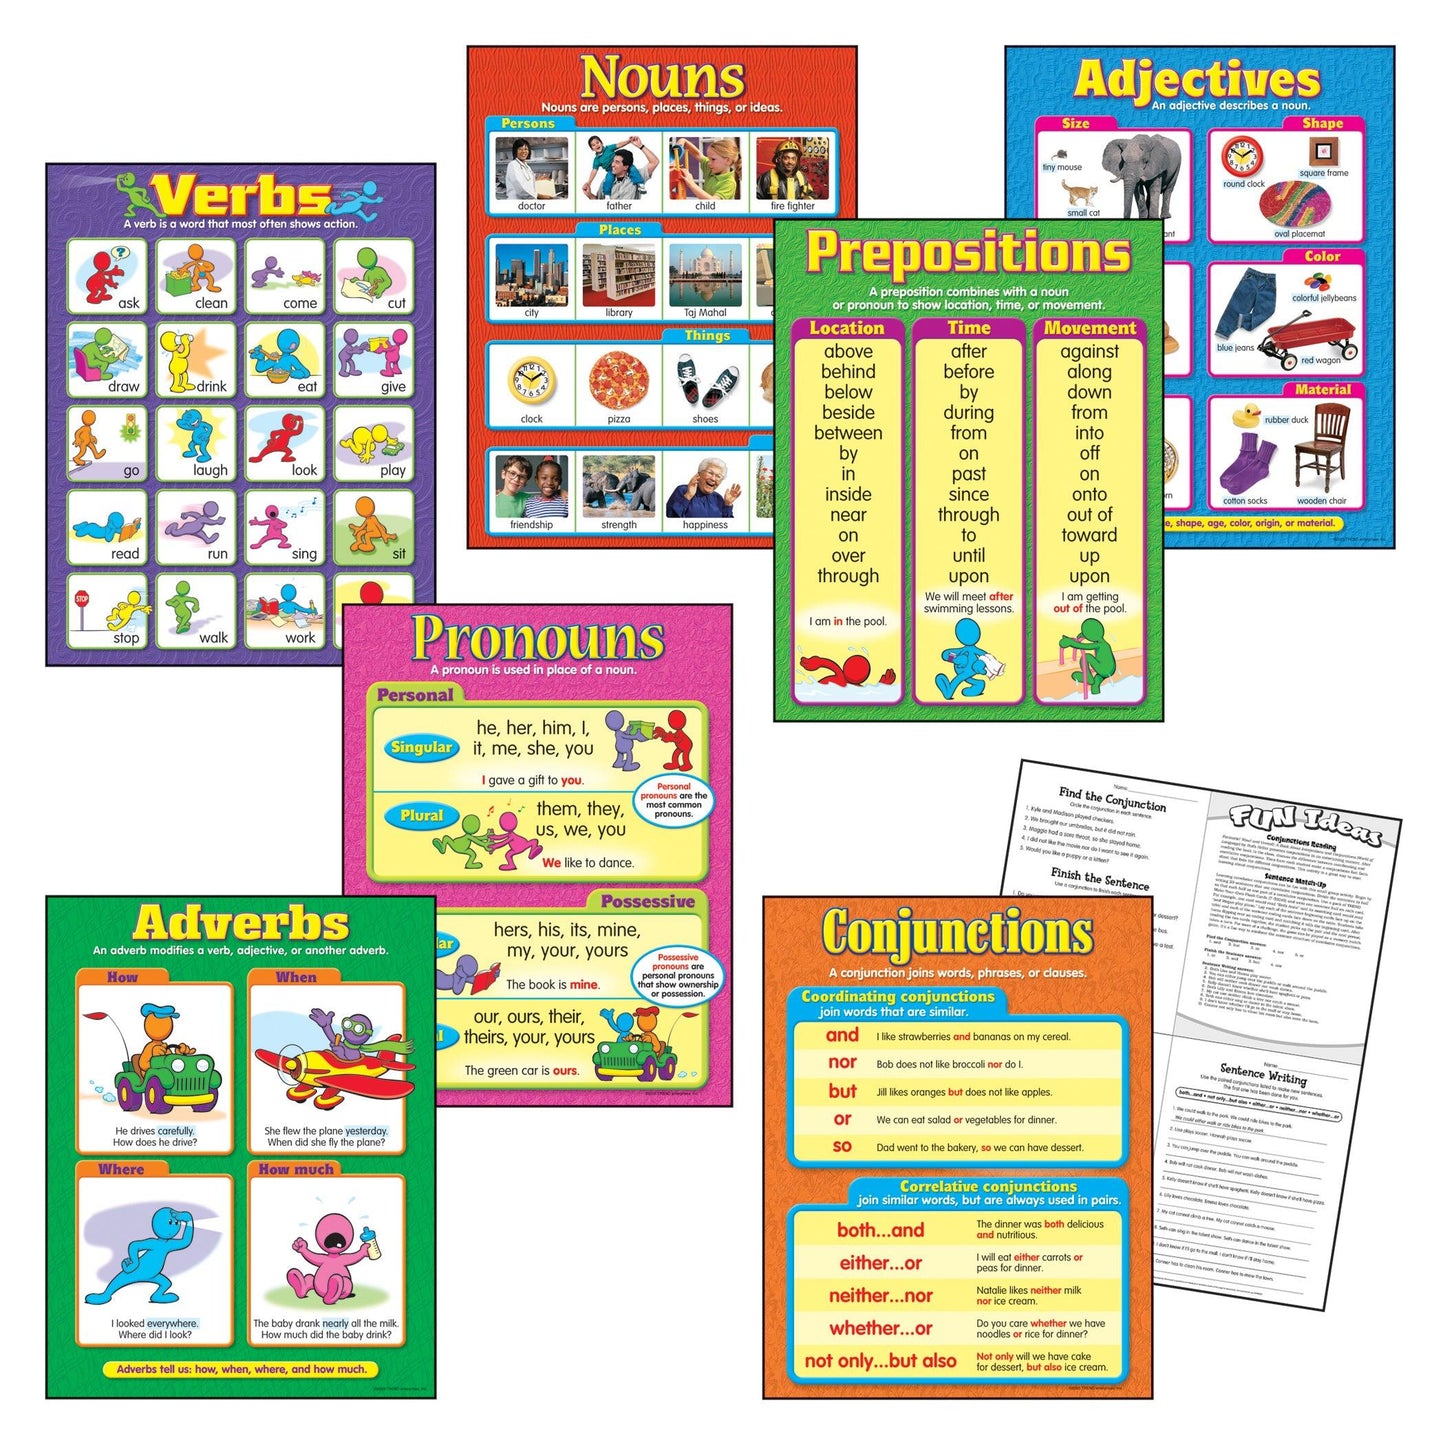 Seven Parts of Speech Learning Charts Combo Pack, Set of 7 - Loomini